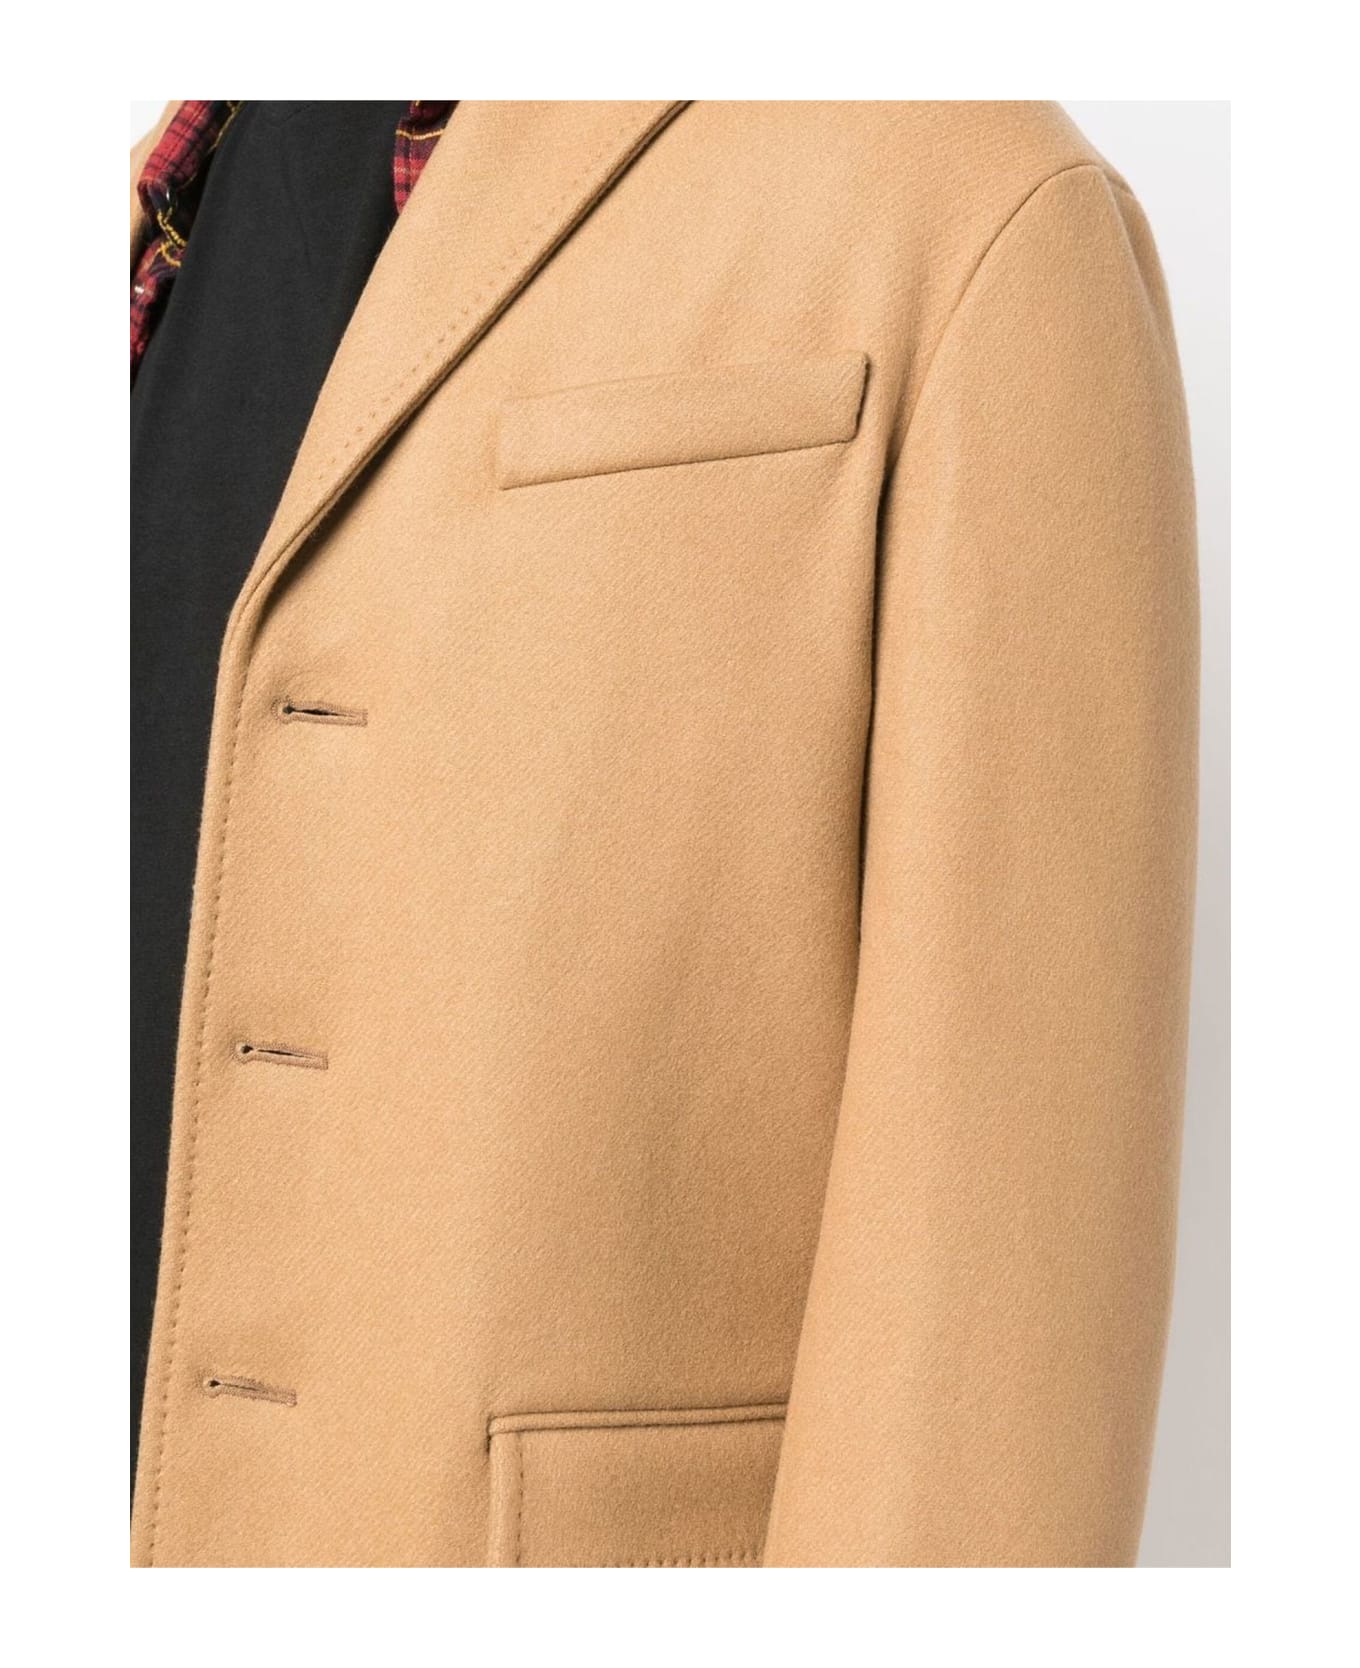 Dsquared2 Single-breasted Coat - Beige